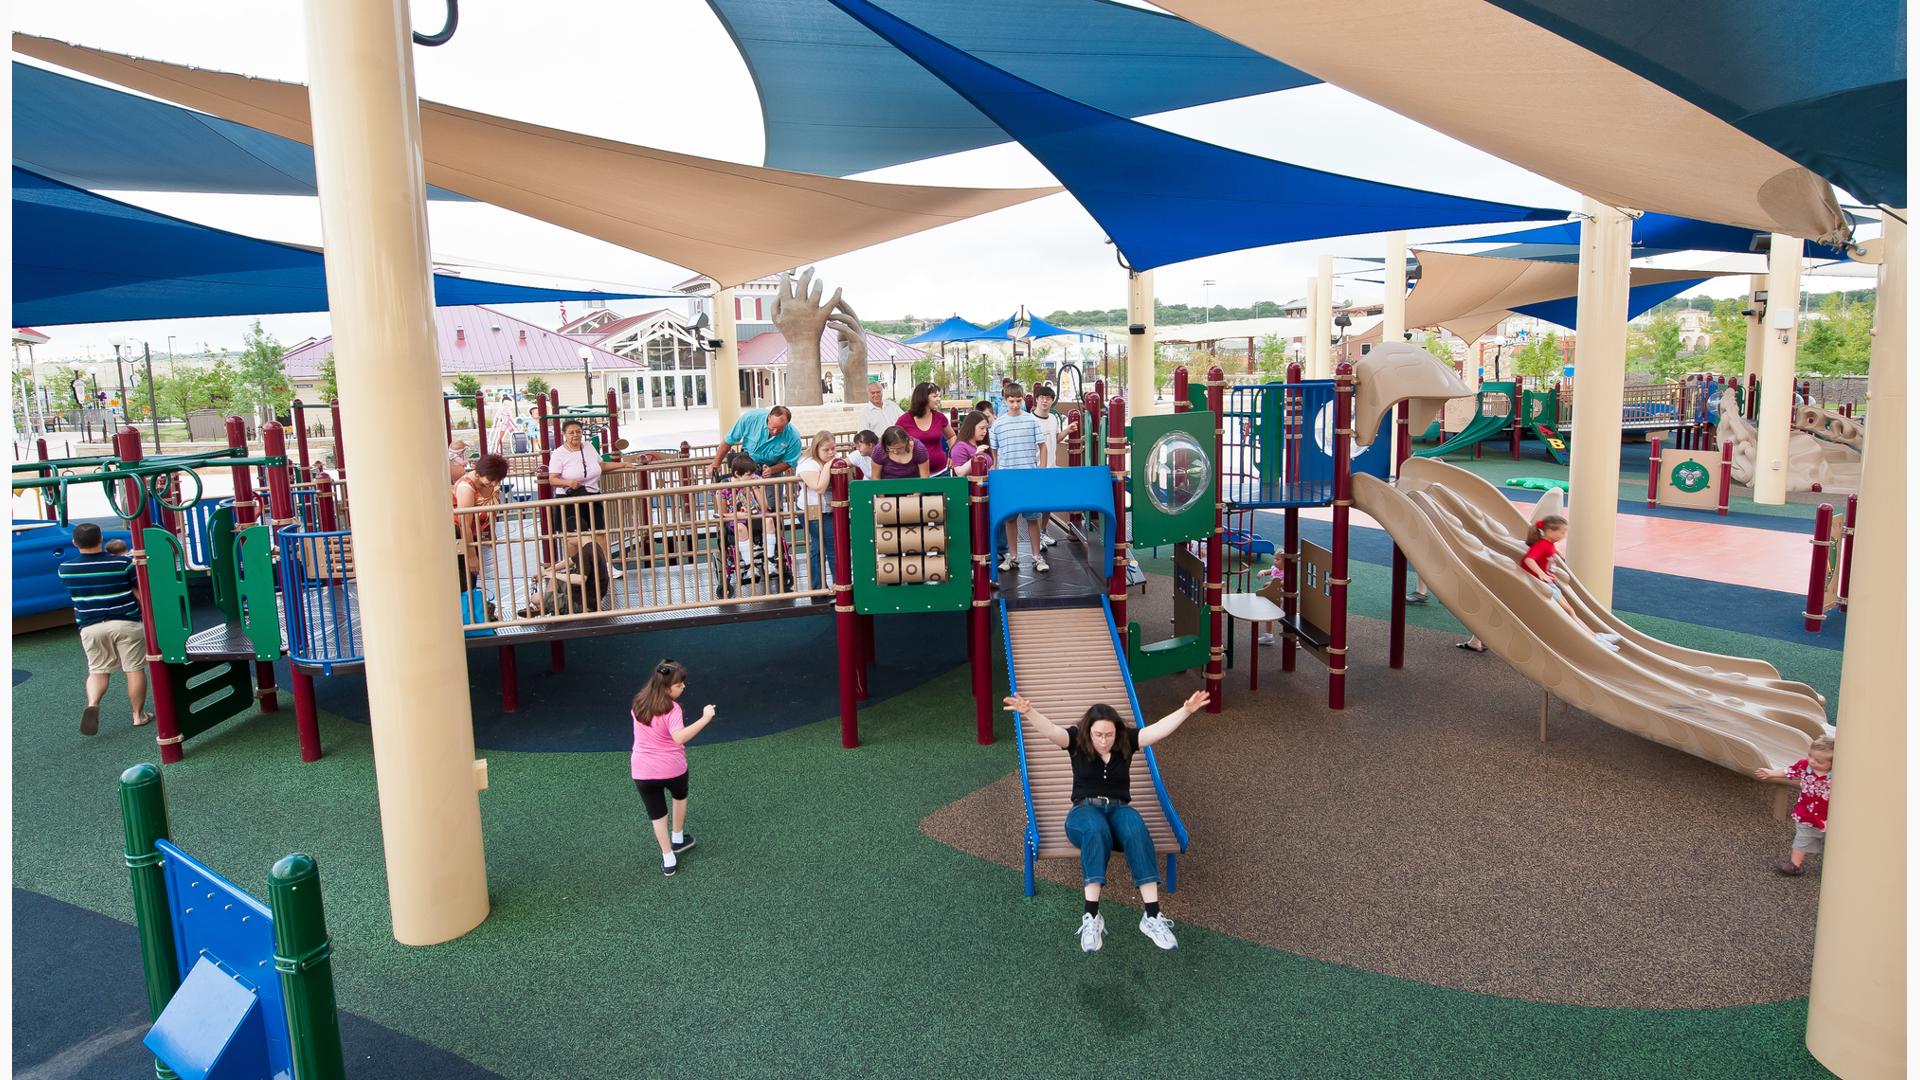 Morgan's Wonderland, San Antonio, TX.  A pirate-themed play area features two inclusive PlayBooster® play structures outfitted with soaring masts and sails.